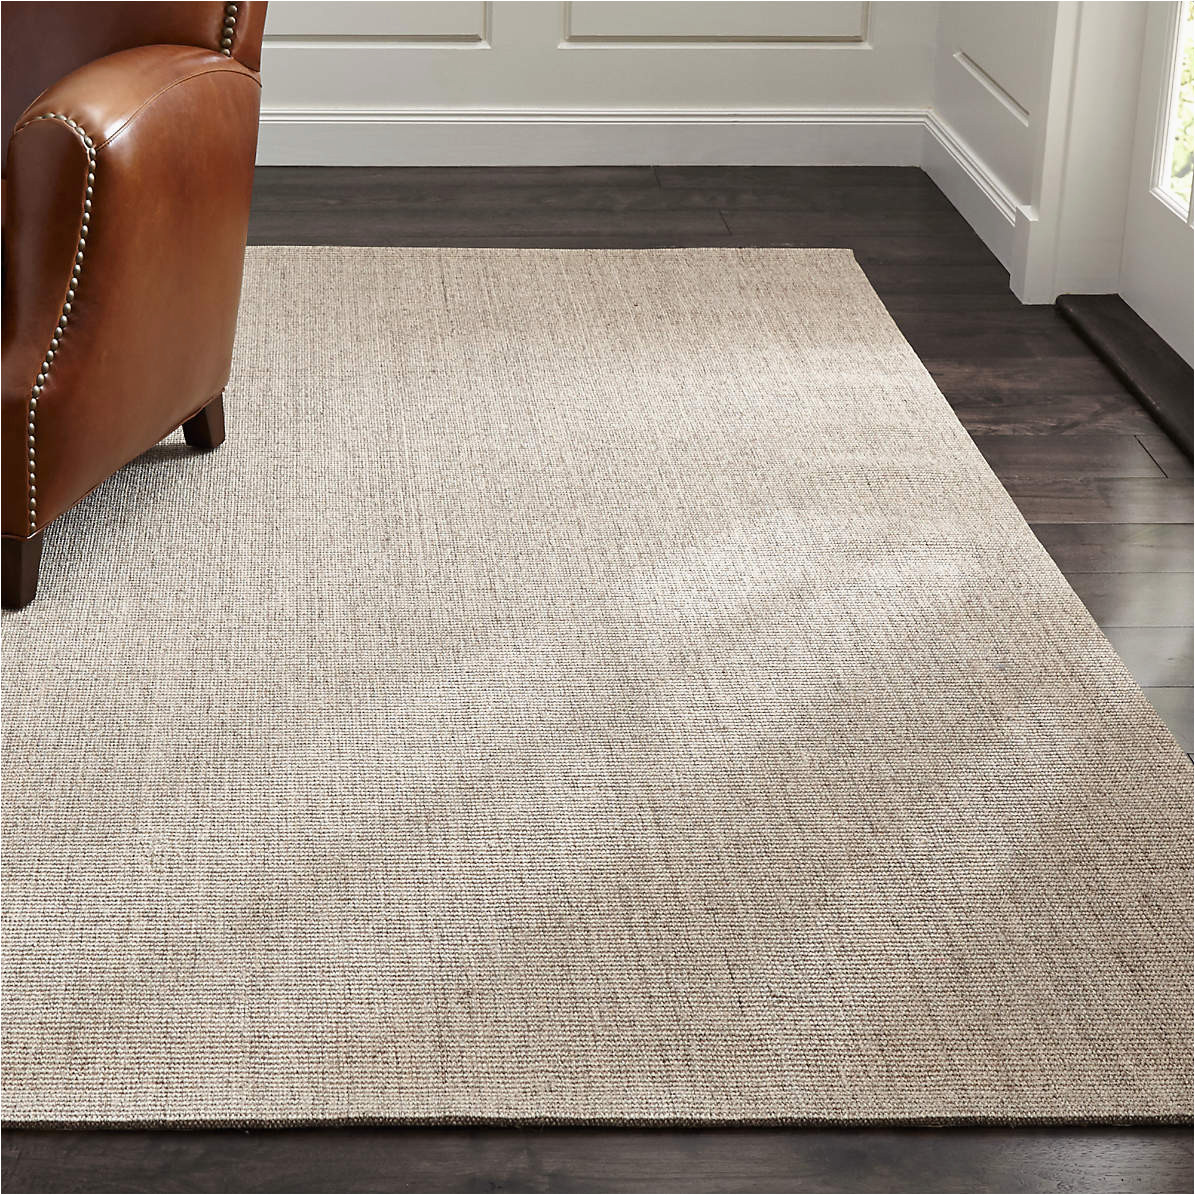 Crate and Barrel Round area Rugs Sisal Linen area Rug Crate & Barrel